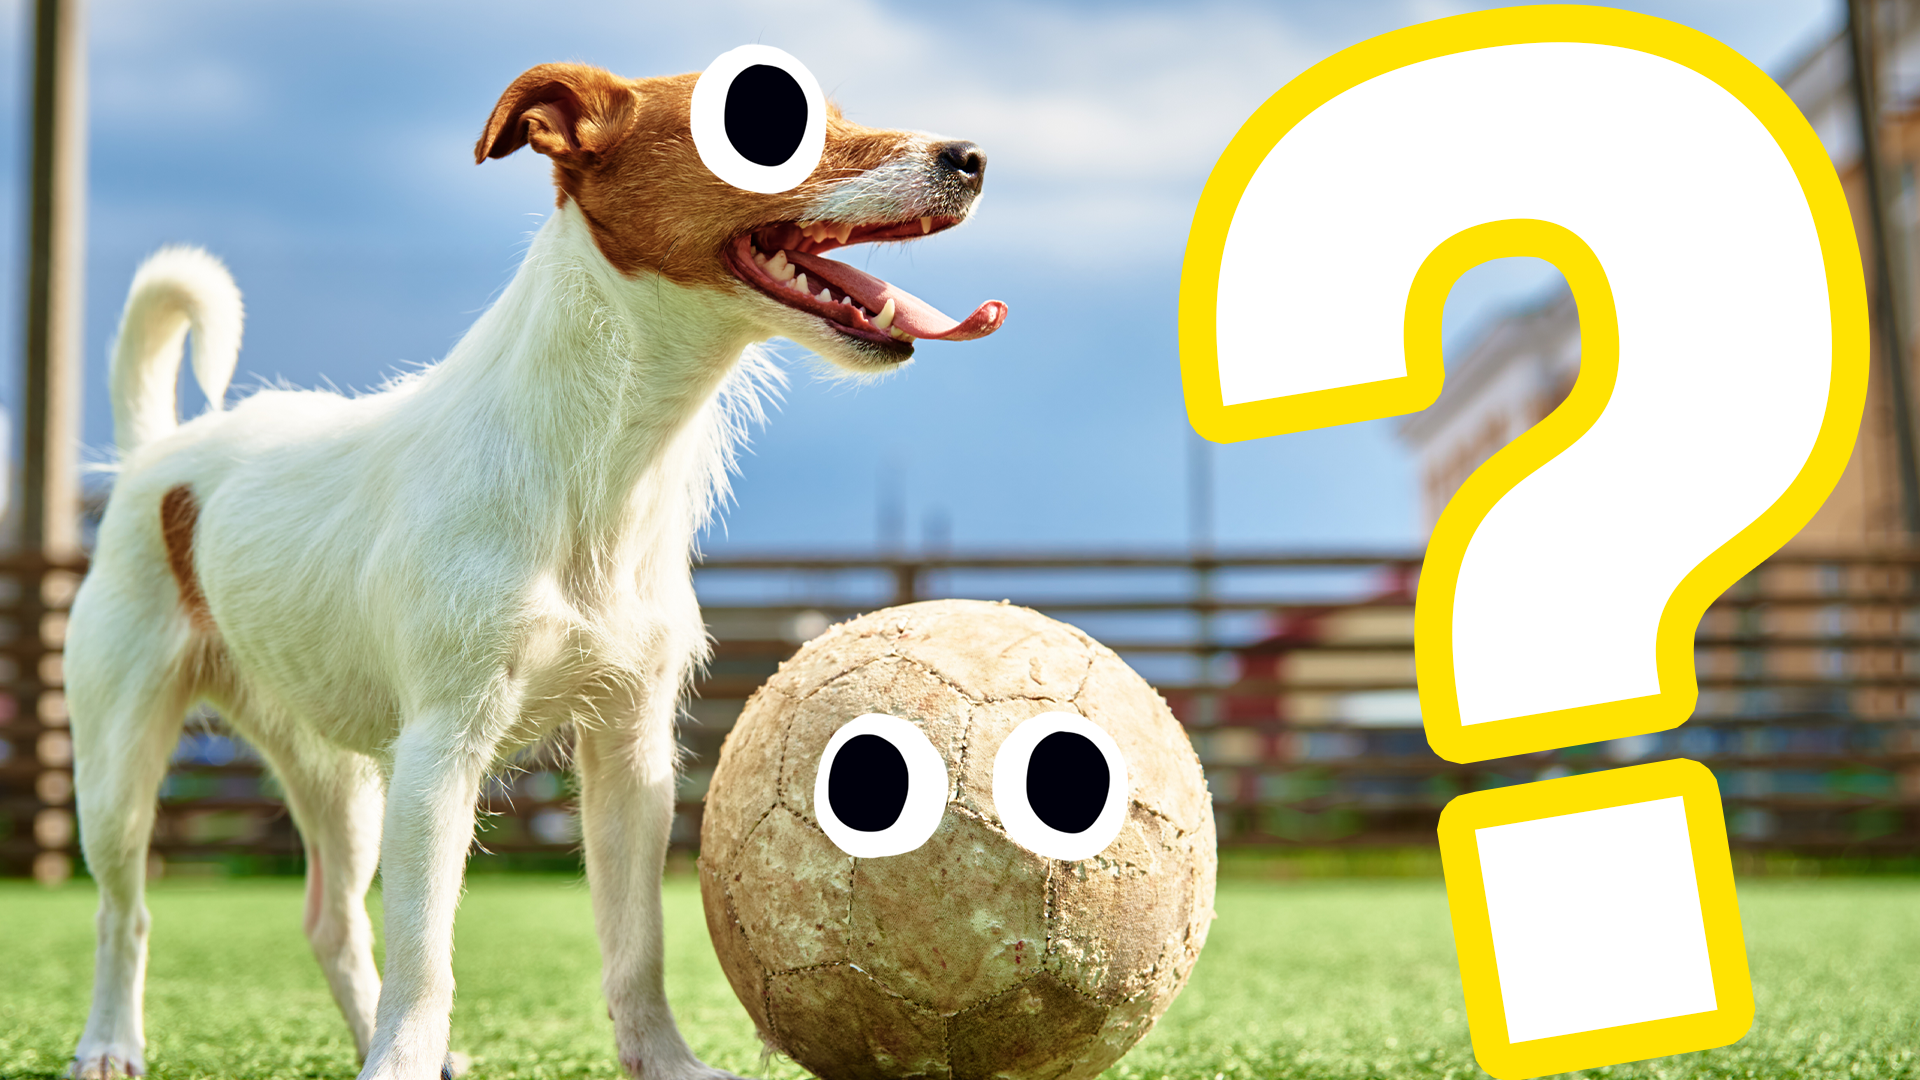 Dog, football and question mark